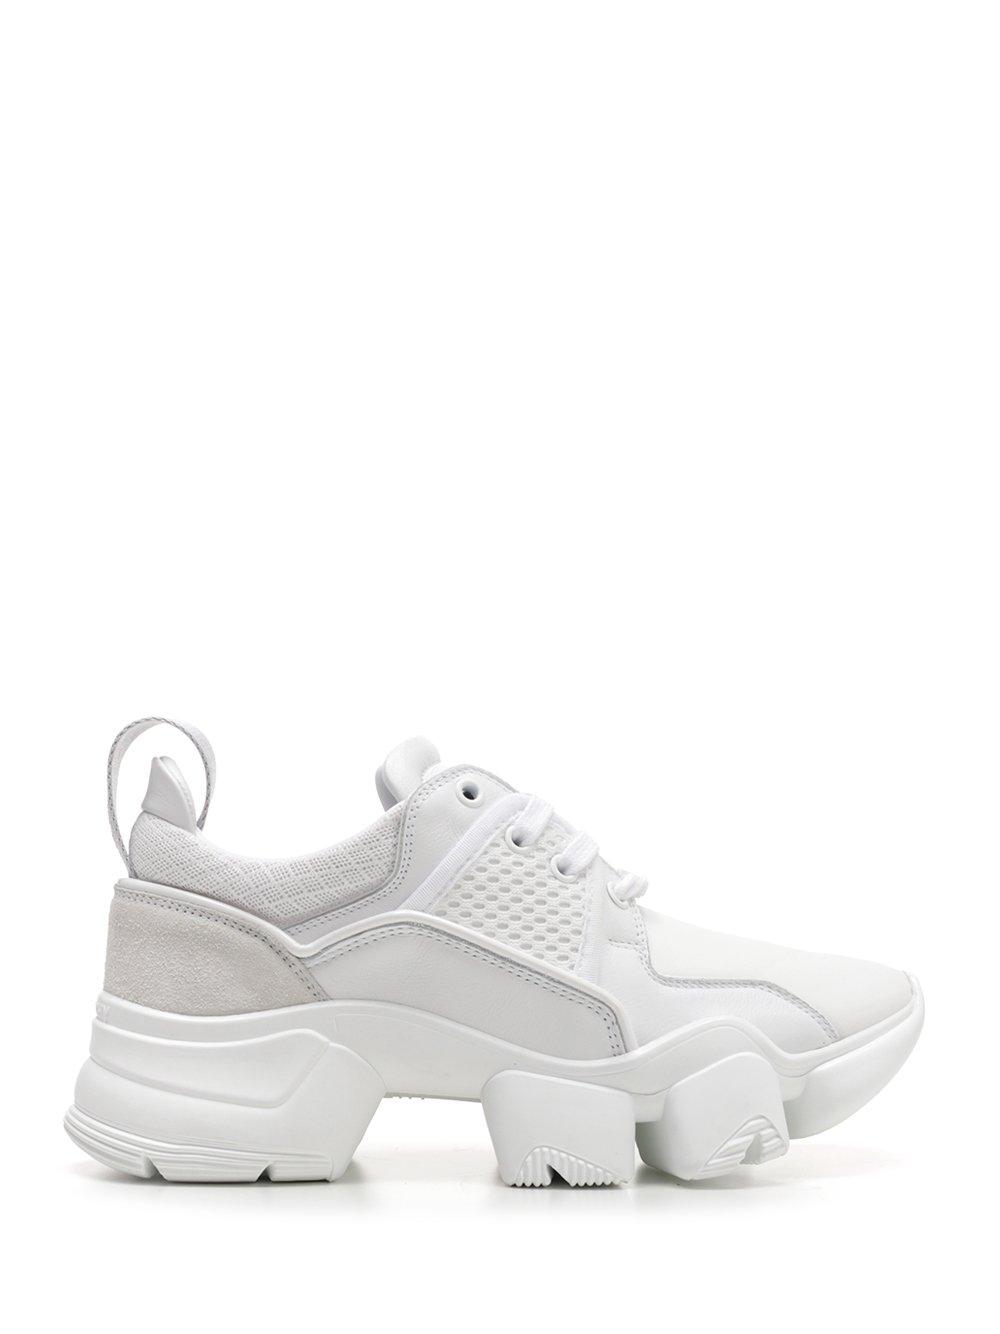 Givenchy Leather Jaw Chunky Sneakers in White - Save 57% - Lyst